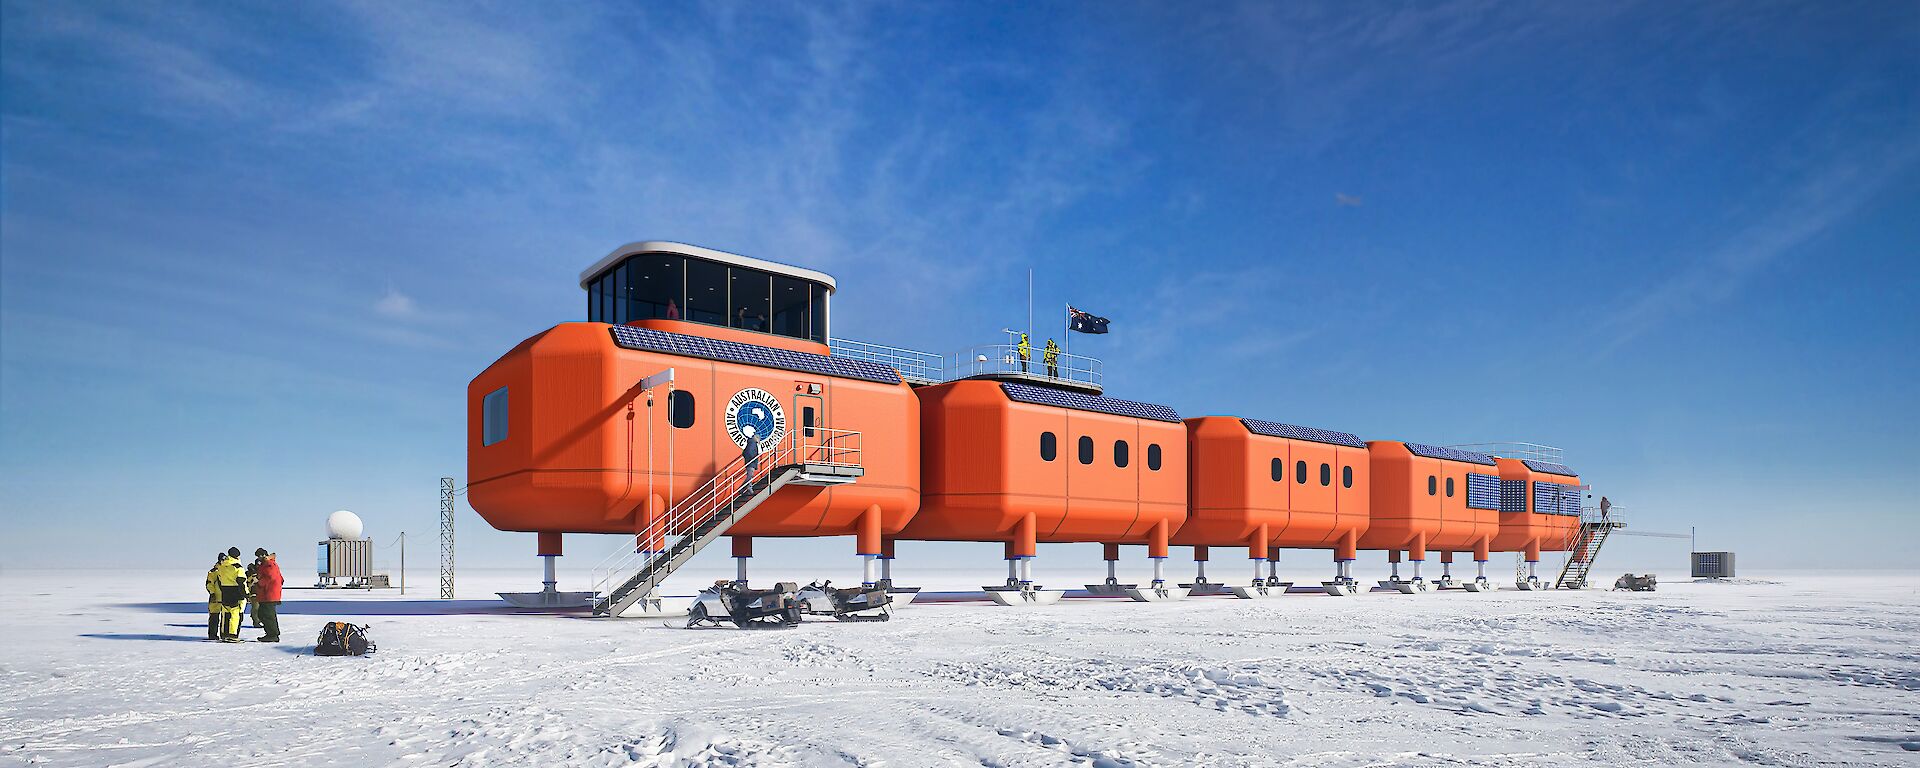 A digital rendering of large red containerised buildings on stilts in a snowy landscape.